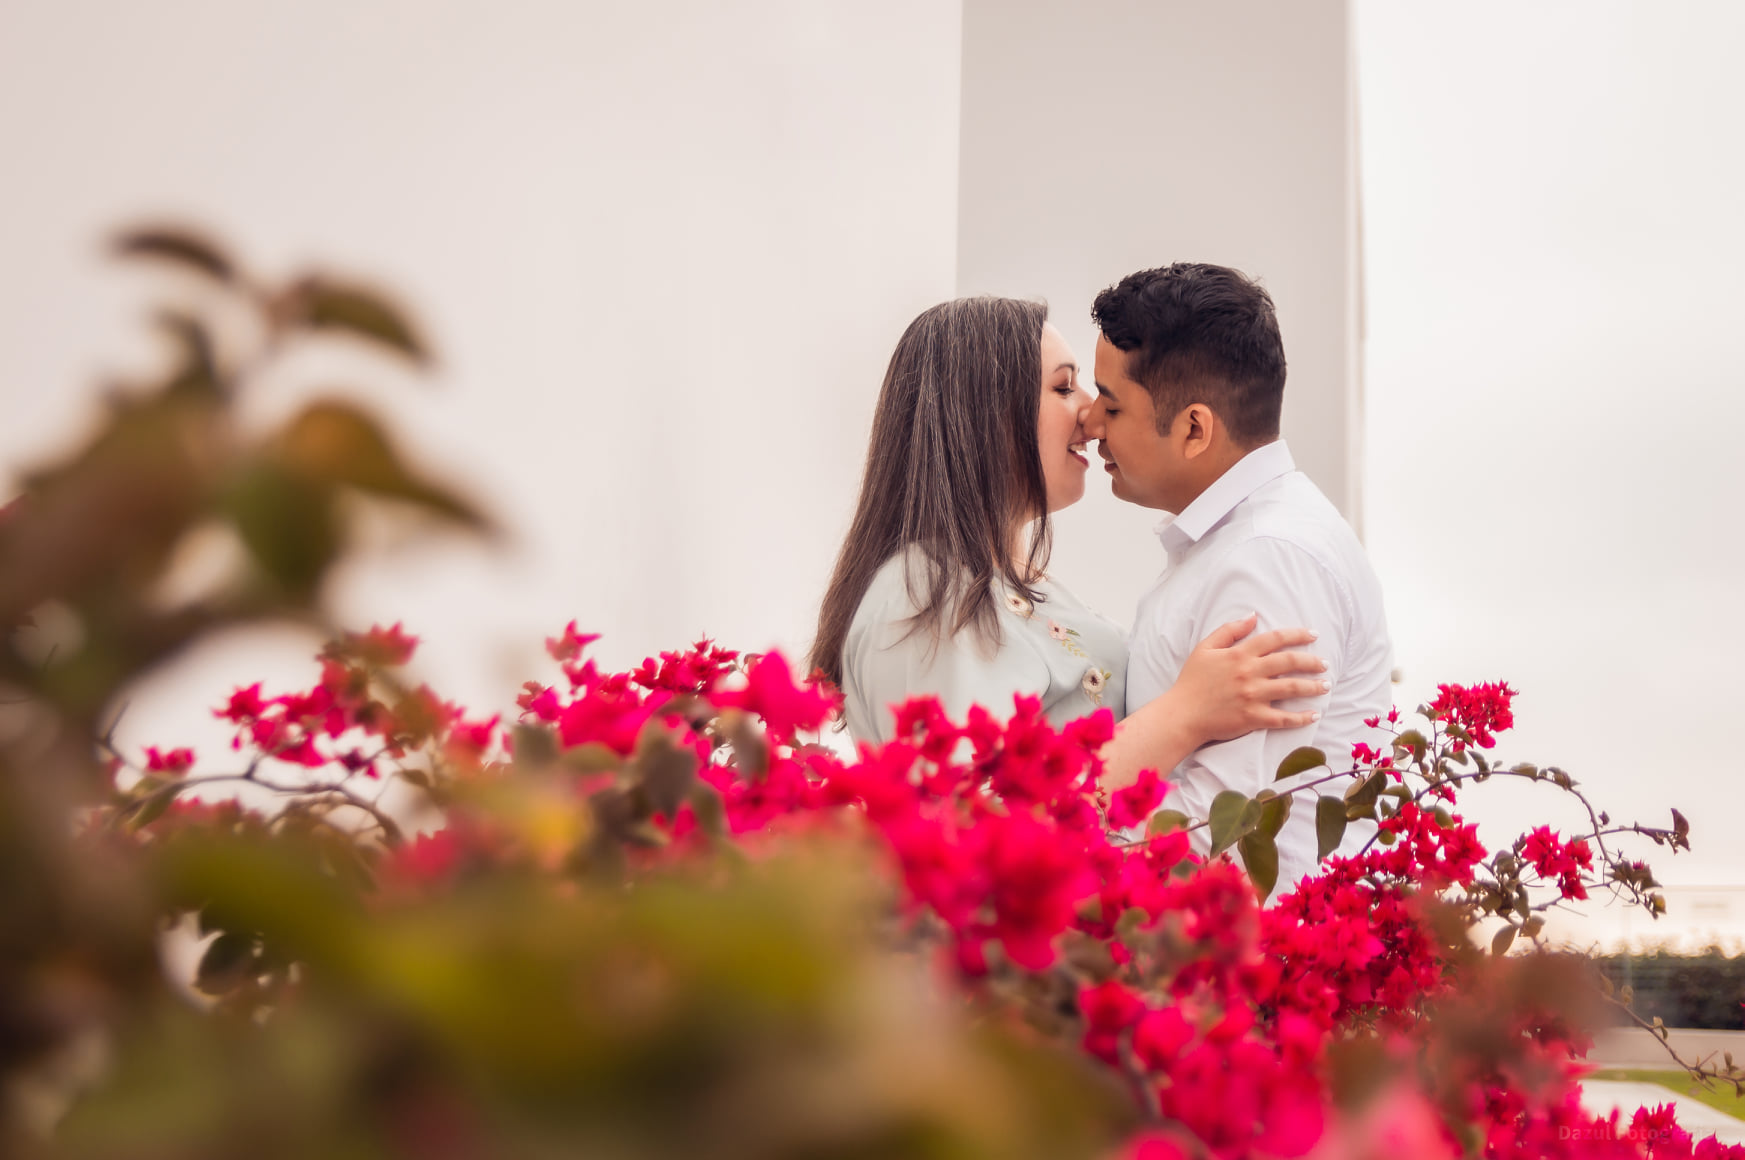 Man and woman about to kiss behind fuchsia flowers.